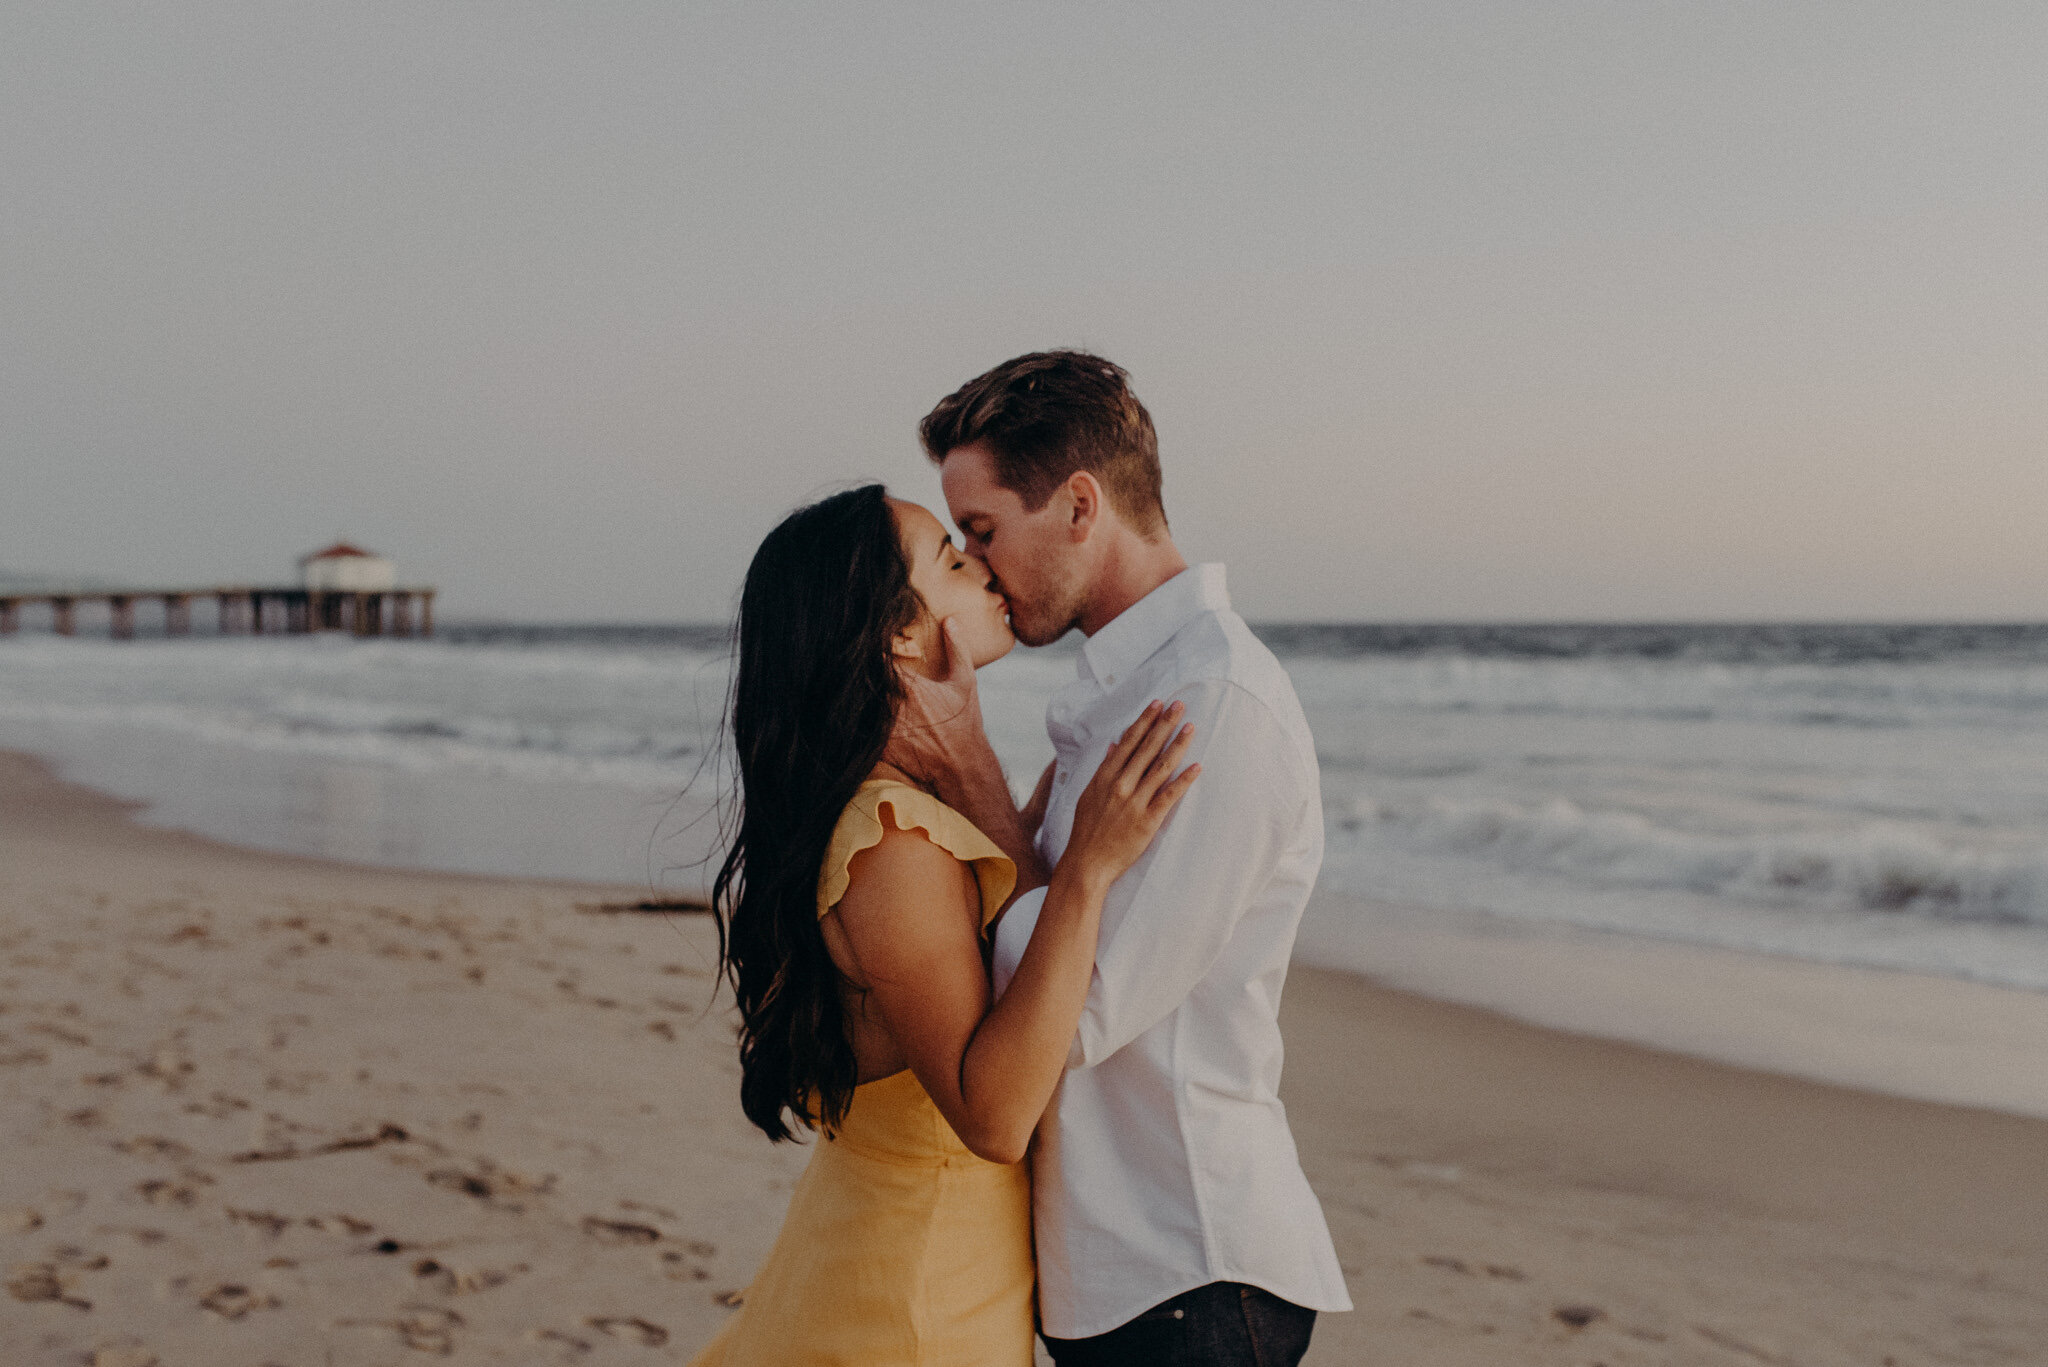 los angeles in-home engagement session - manhattan beach - isaiahandtaylor.com-033.jpg